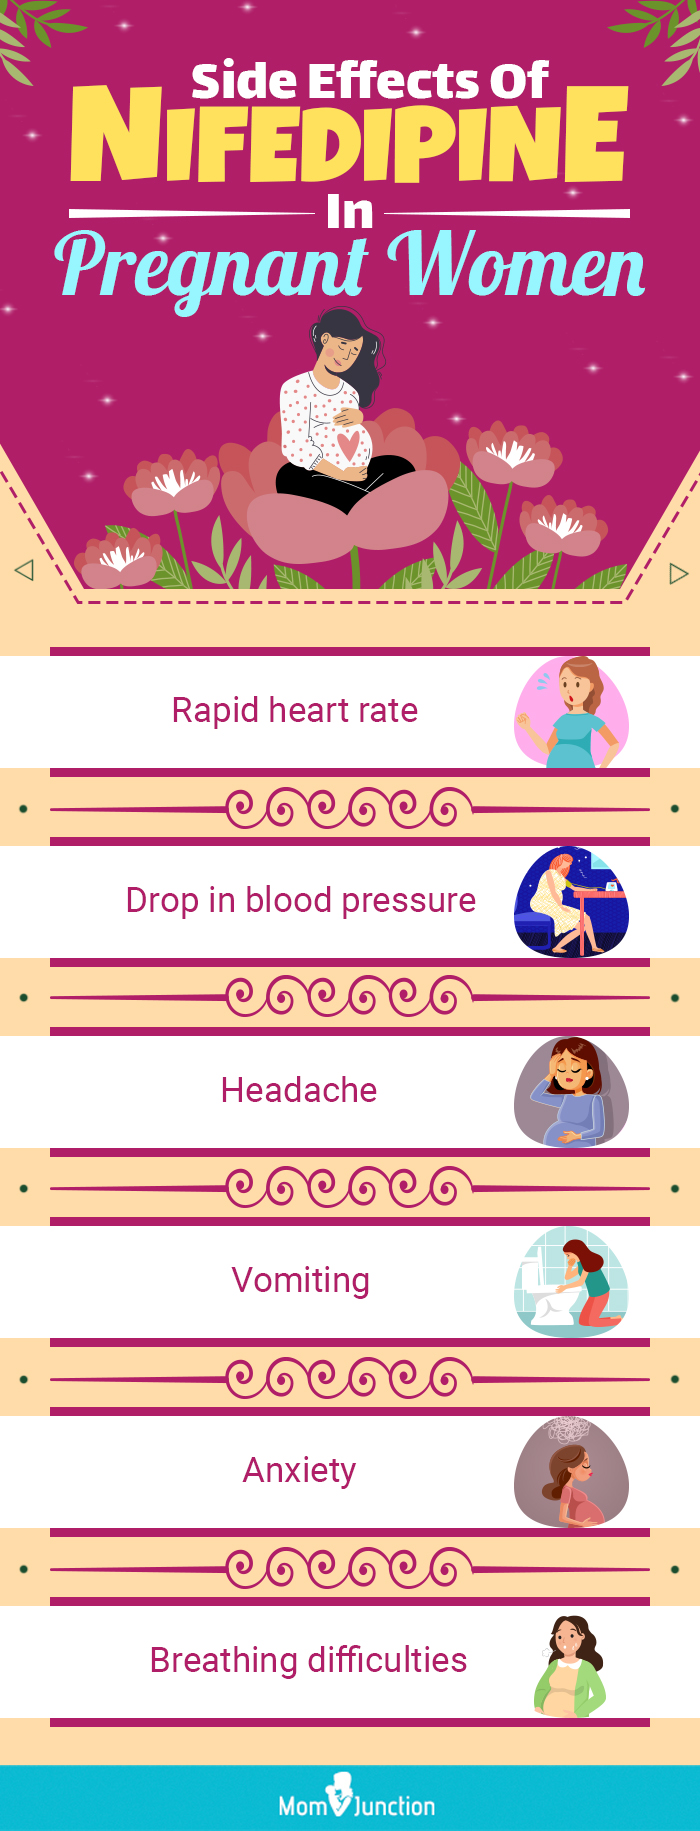 side effects of nifedipine in pregnant women [infographic]